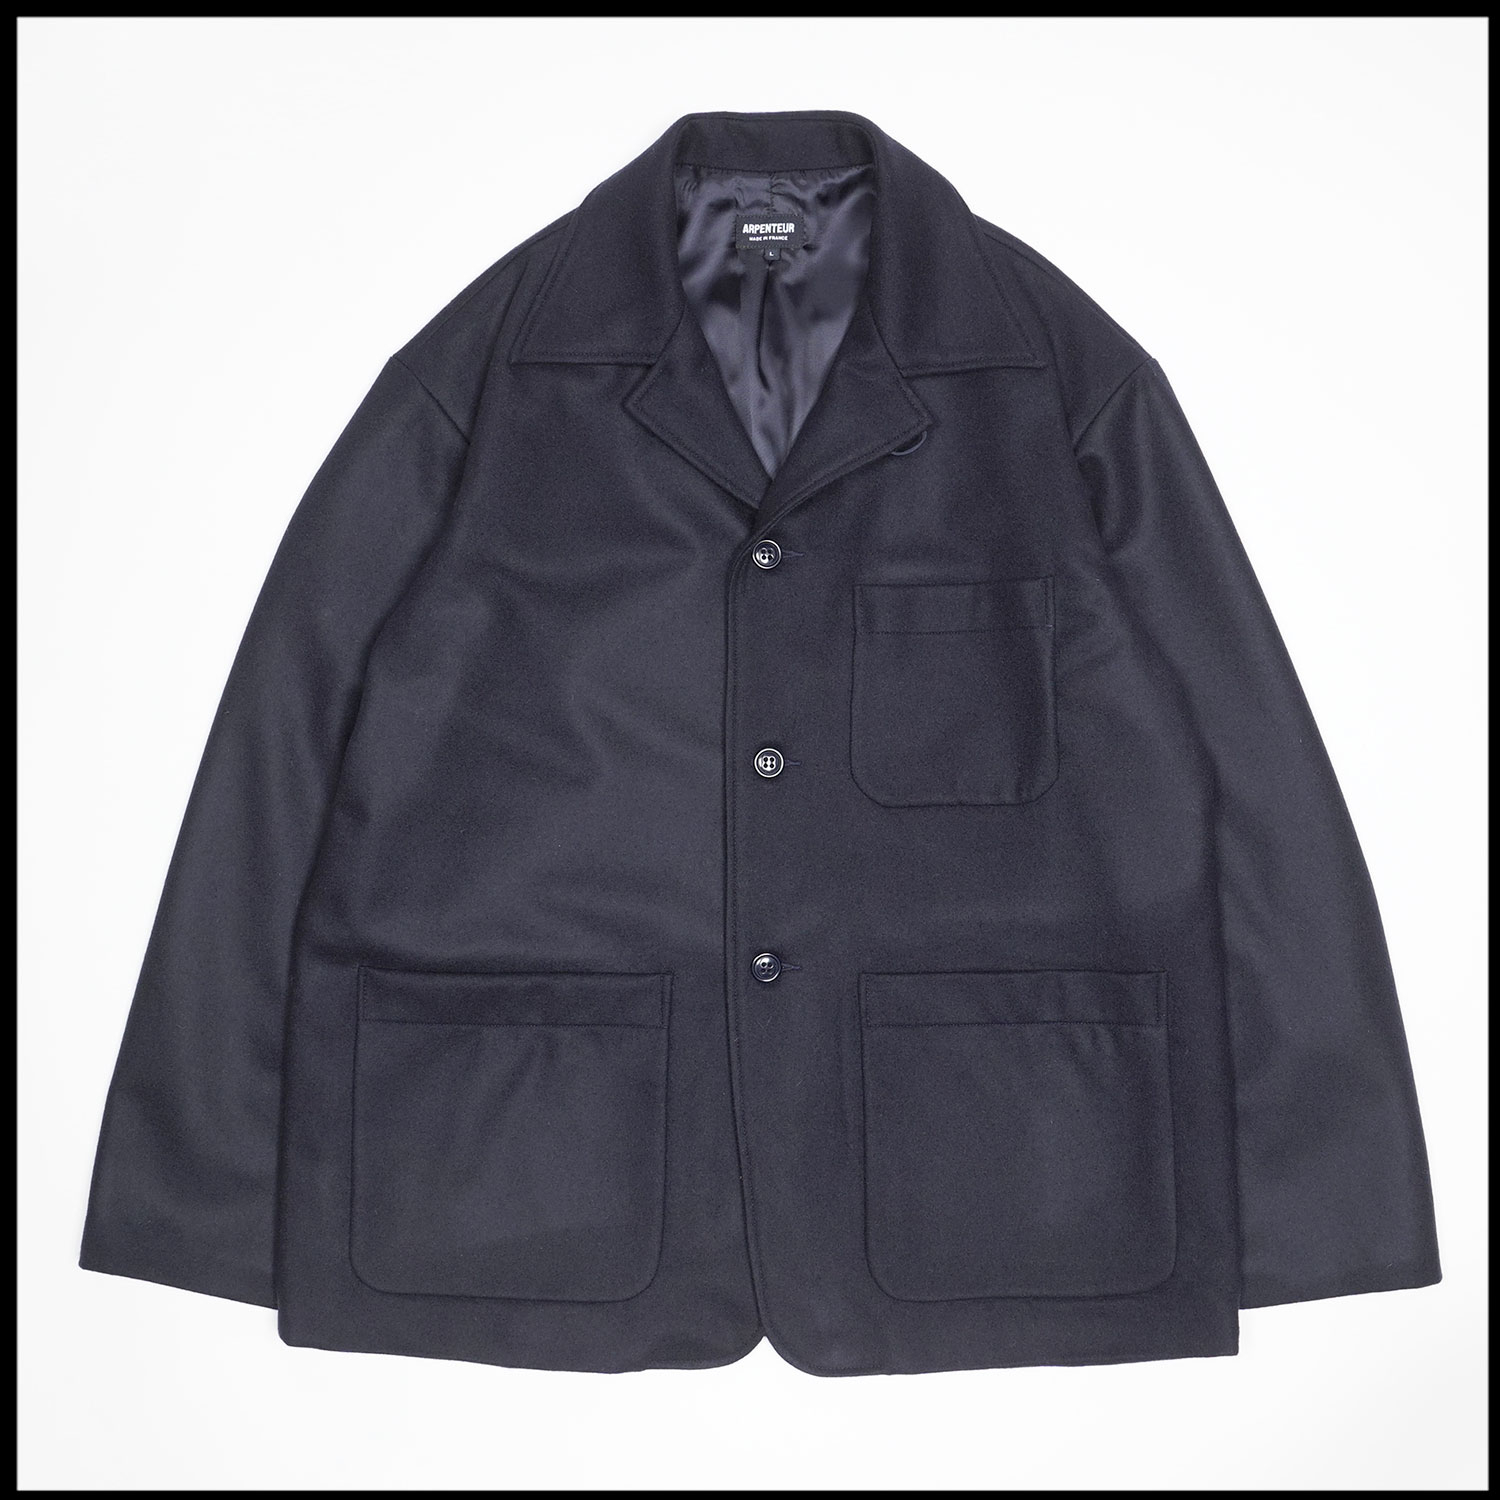 FOX Jacket in Midnight blue color by Arpenteur